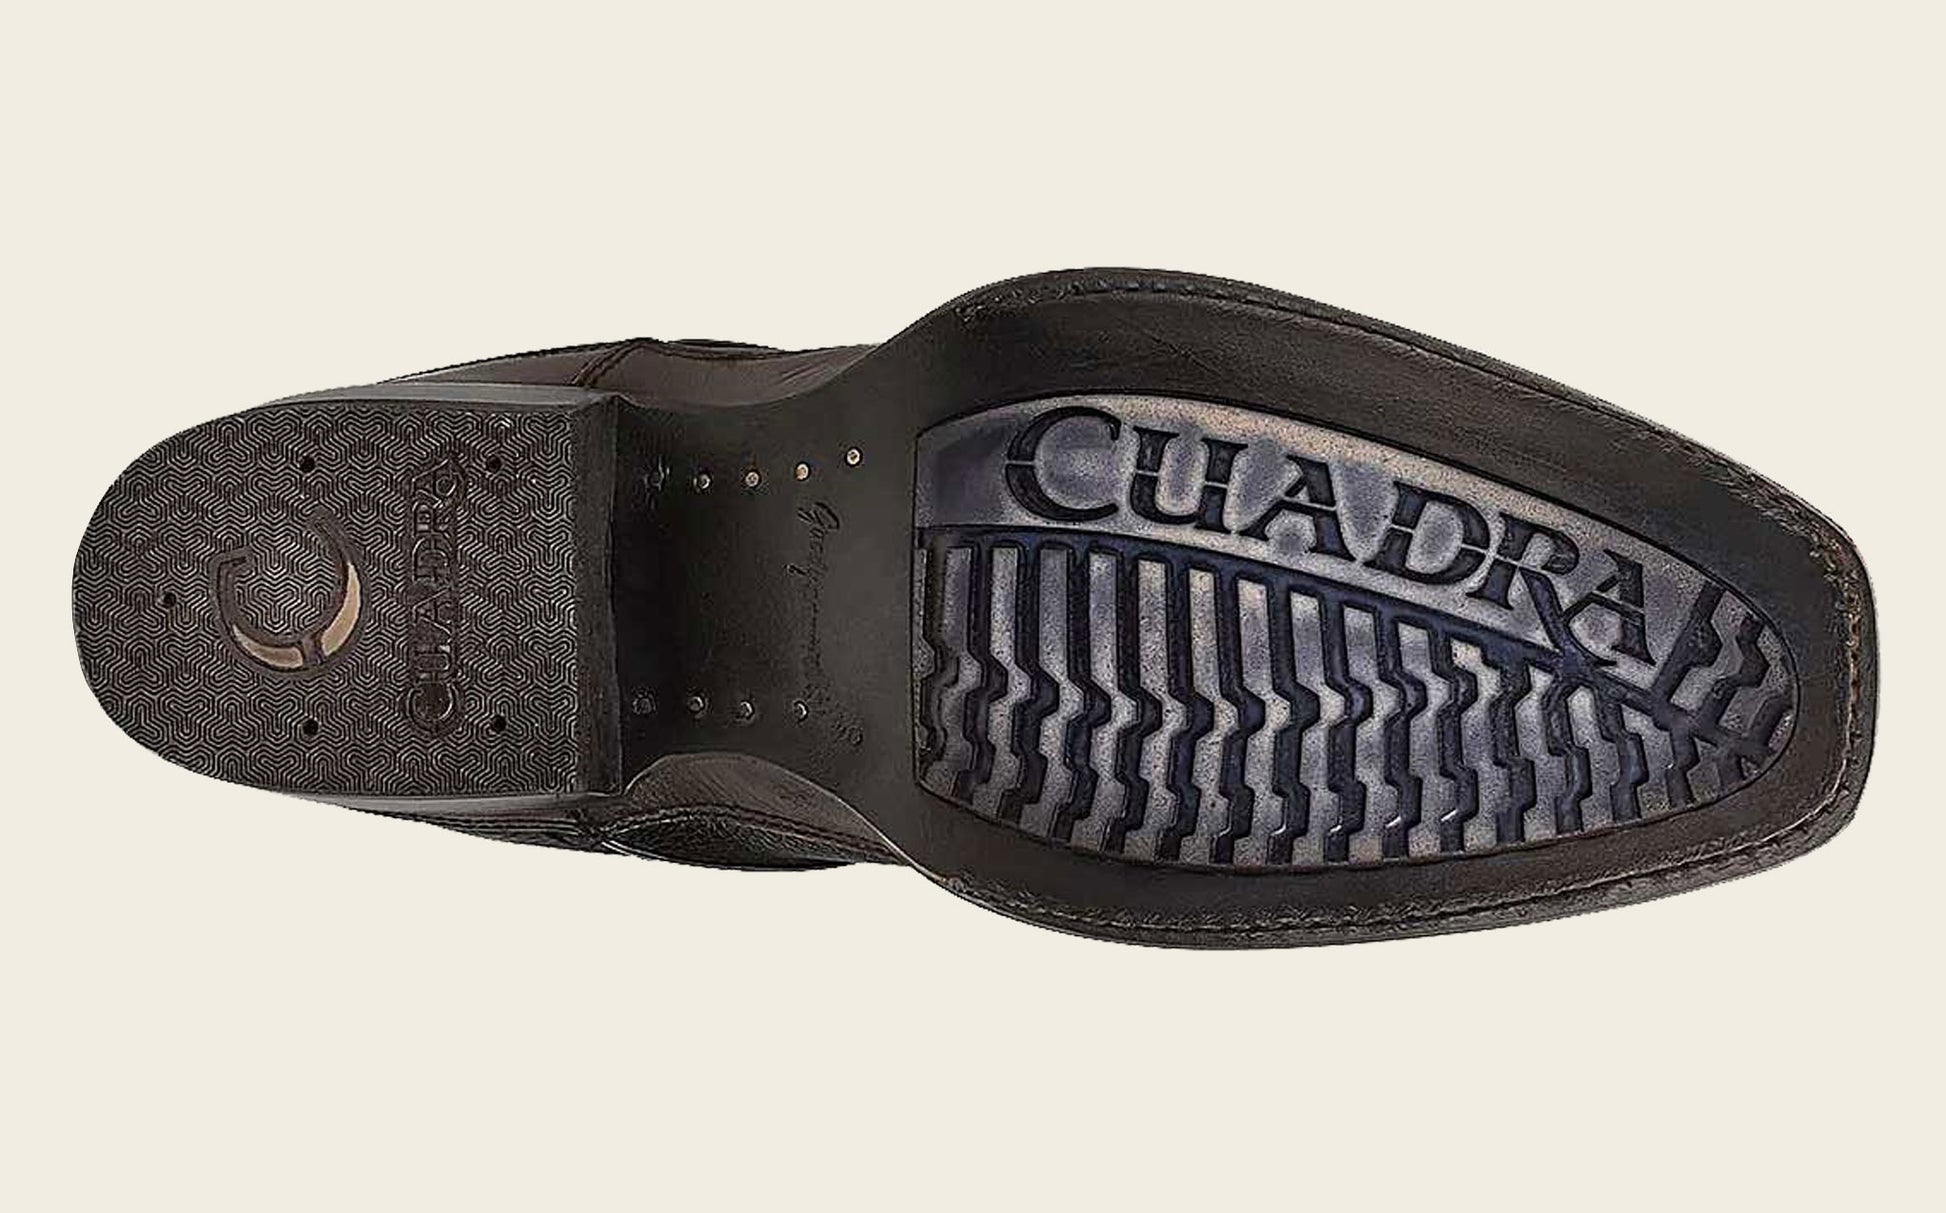 Durable Leather Sole with TPU Insert: Cuadra boots combine quality leather soles with added strength and comfort.